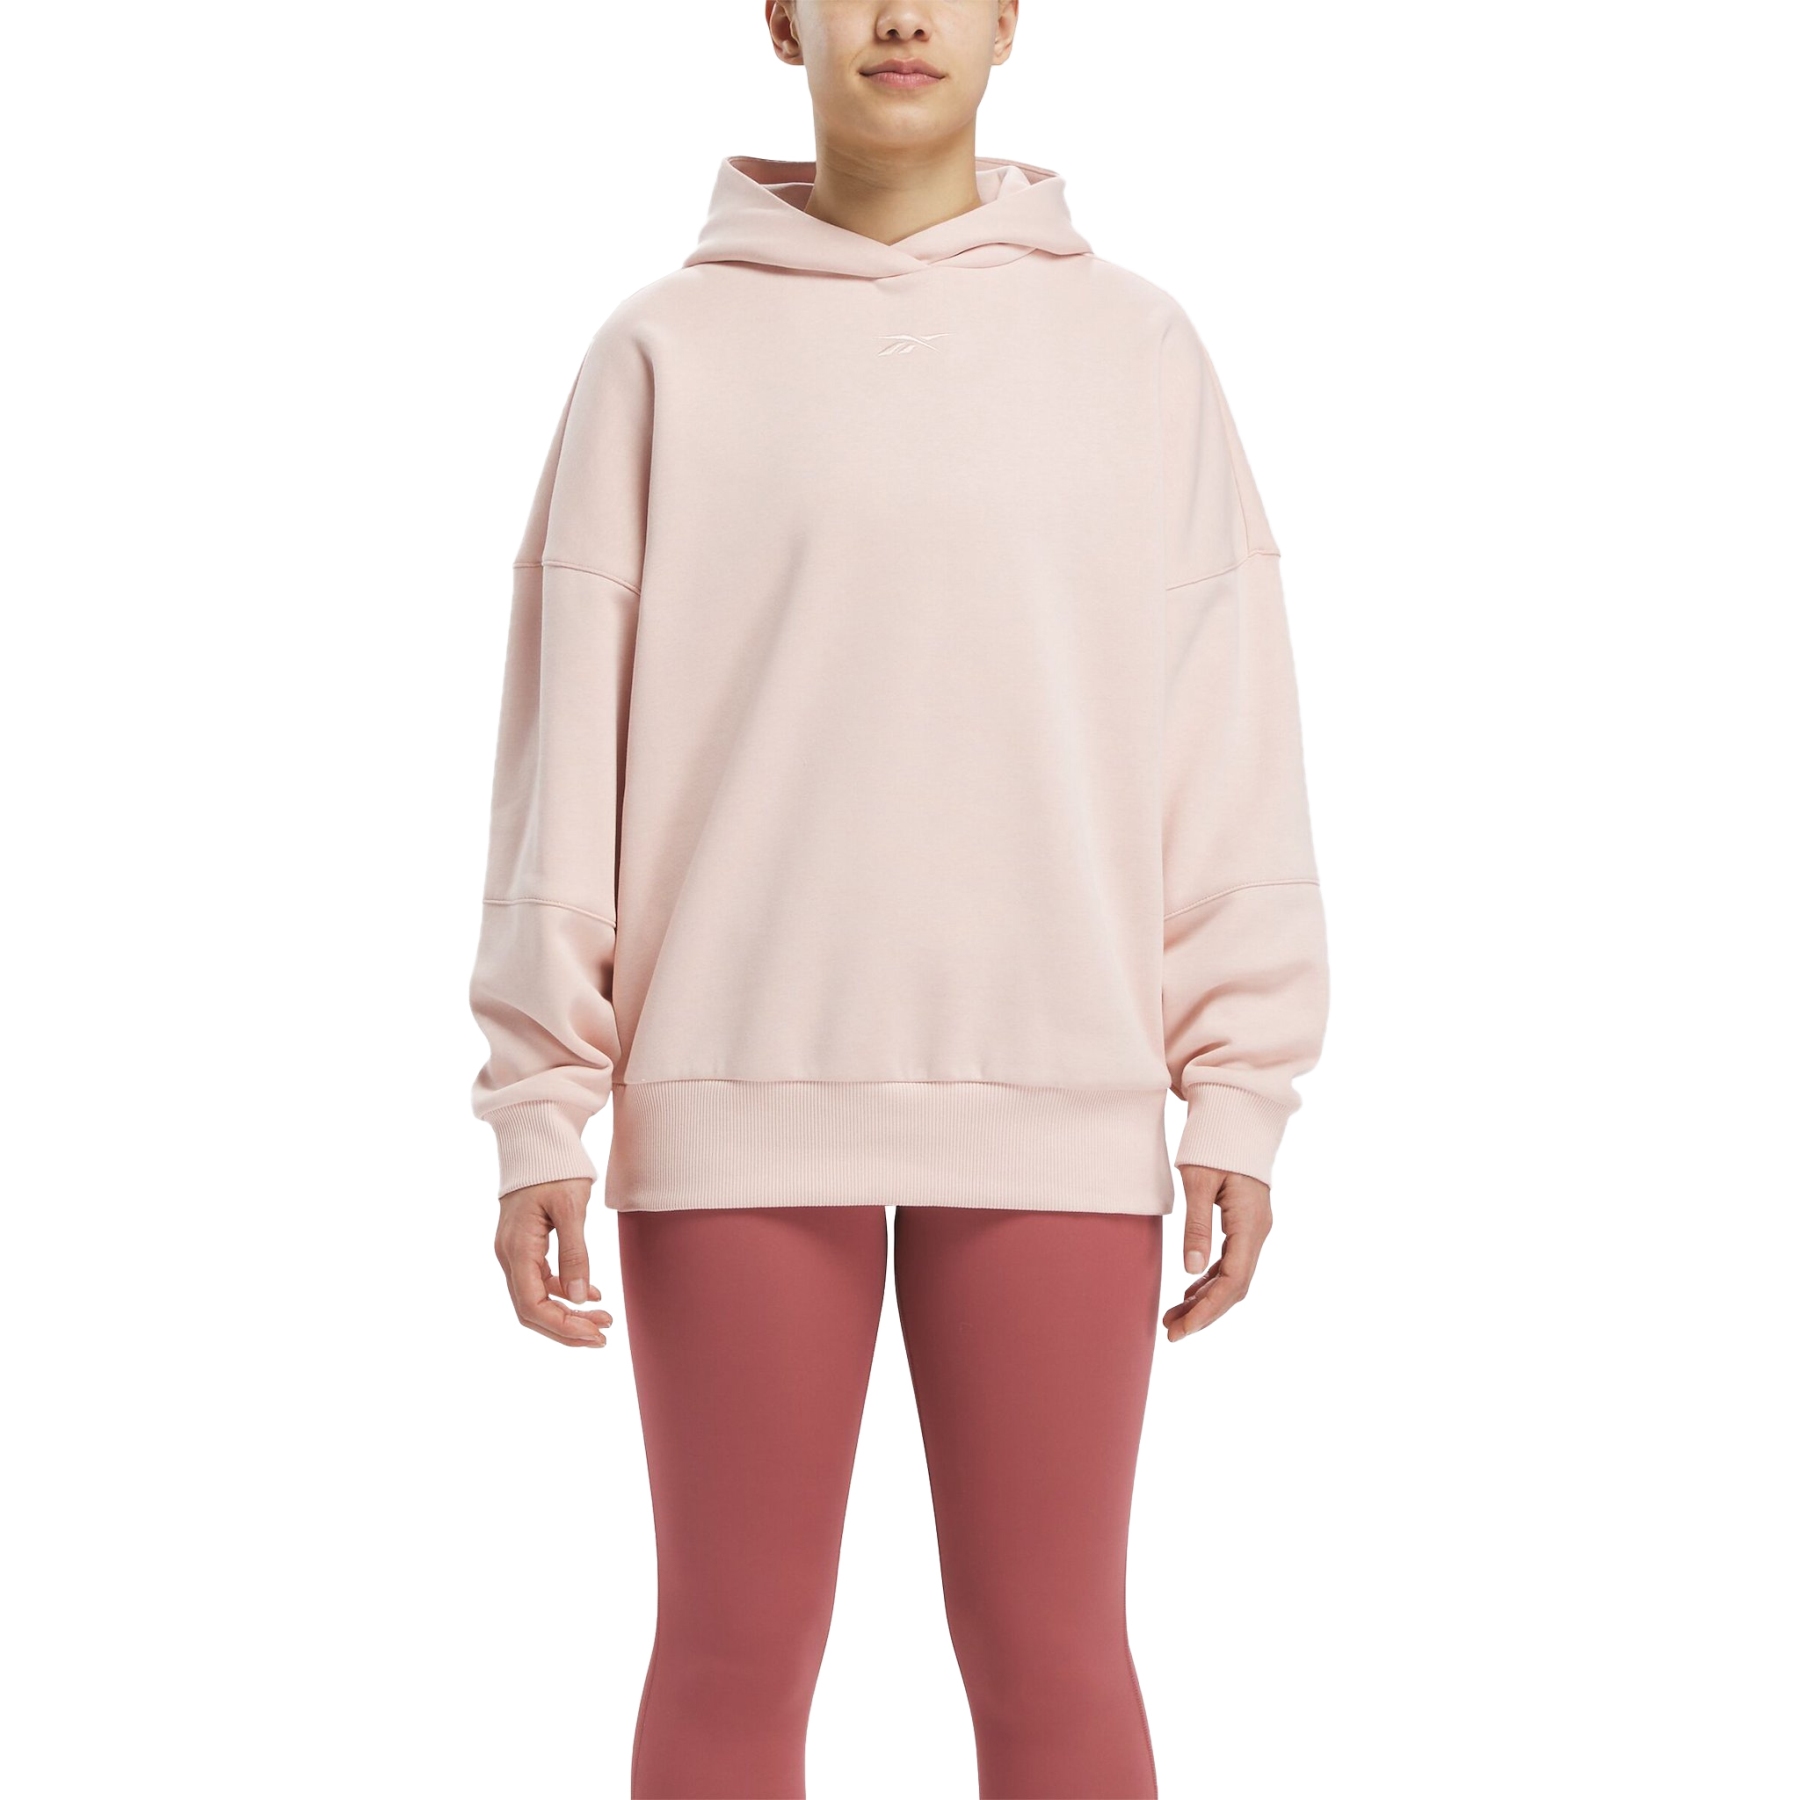 Picture of Reebok Lux Hoodie Women - possibly pink F23-R